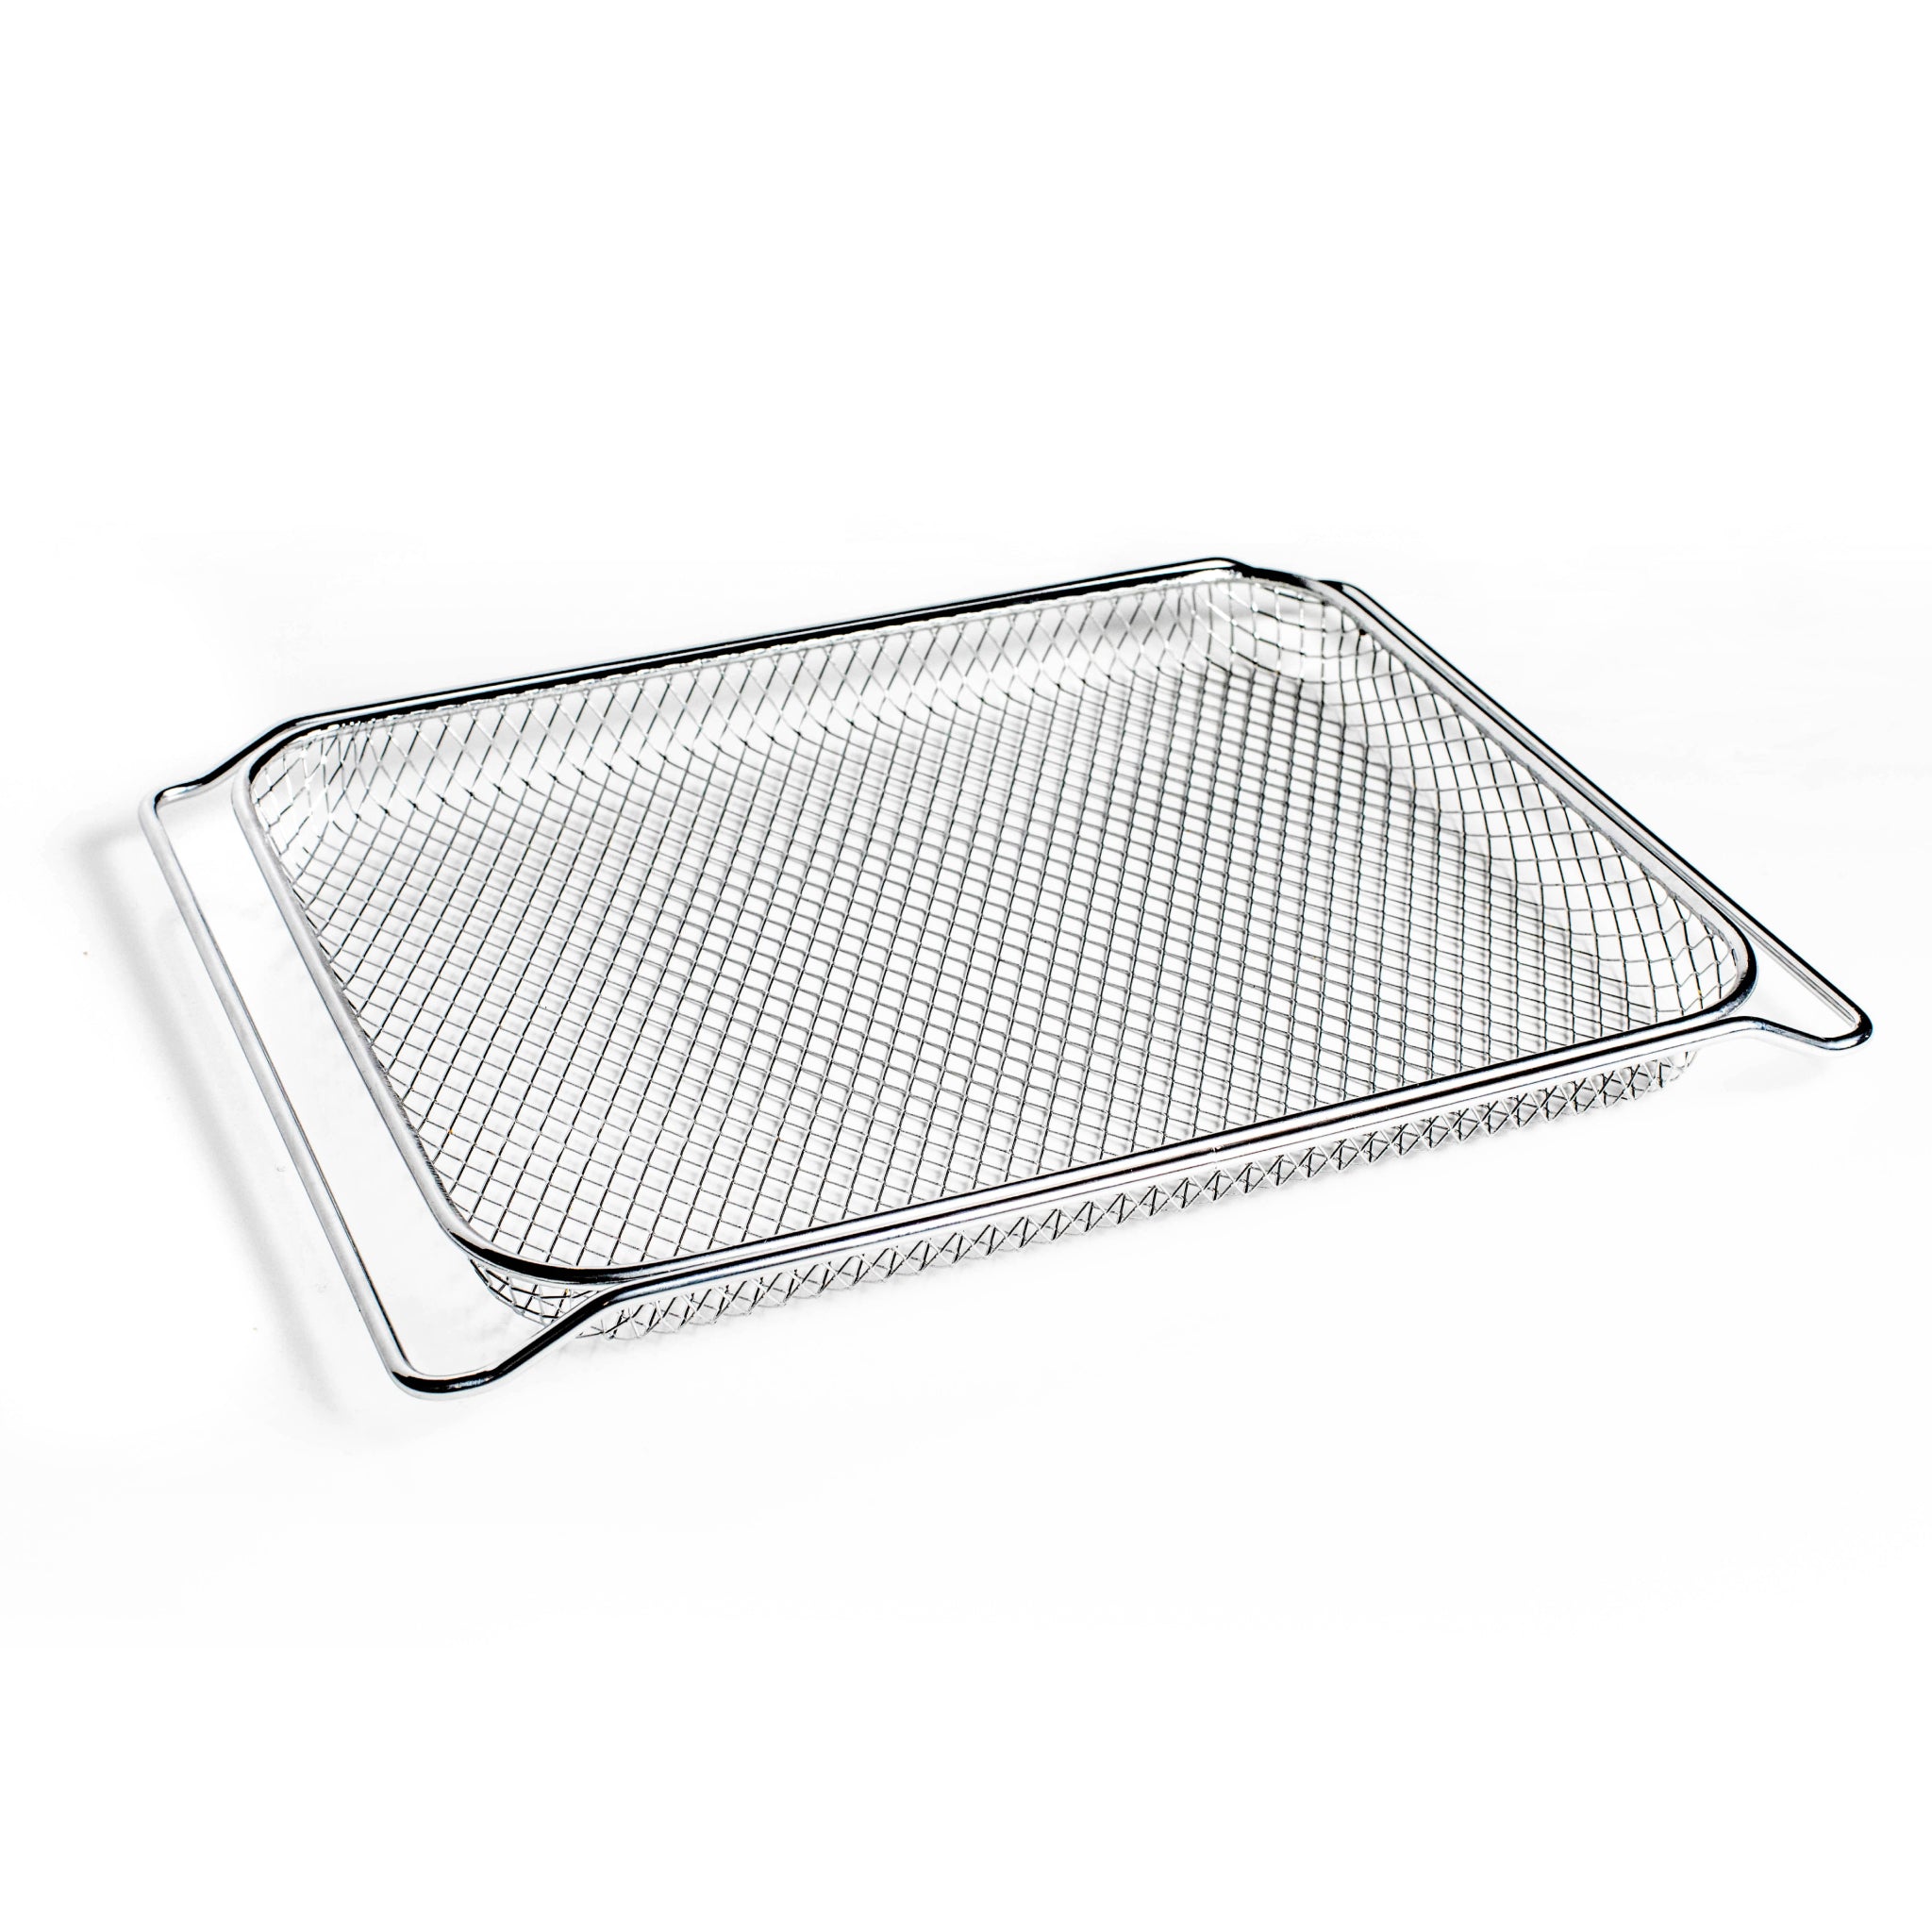 Vulcan 1220-BASKET 12 x 20 Air Fry Basket for ABC and MINI-JET Combi Ovens